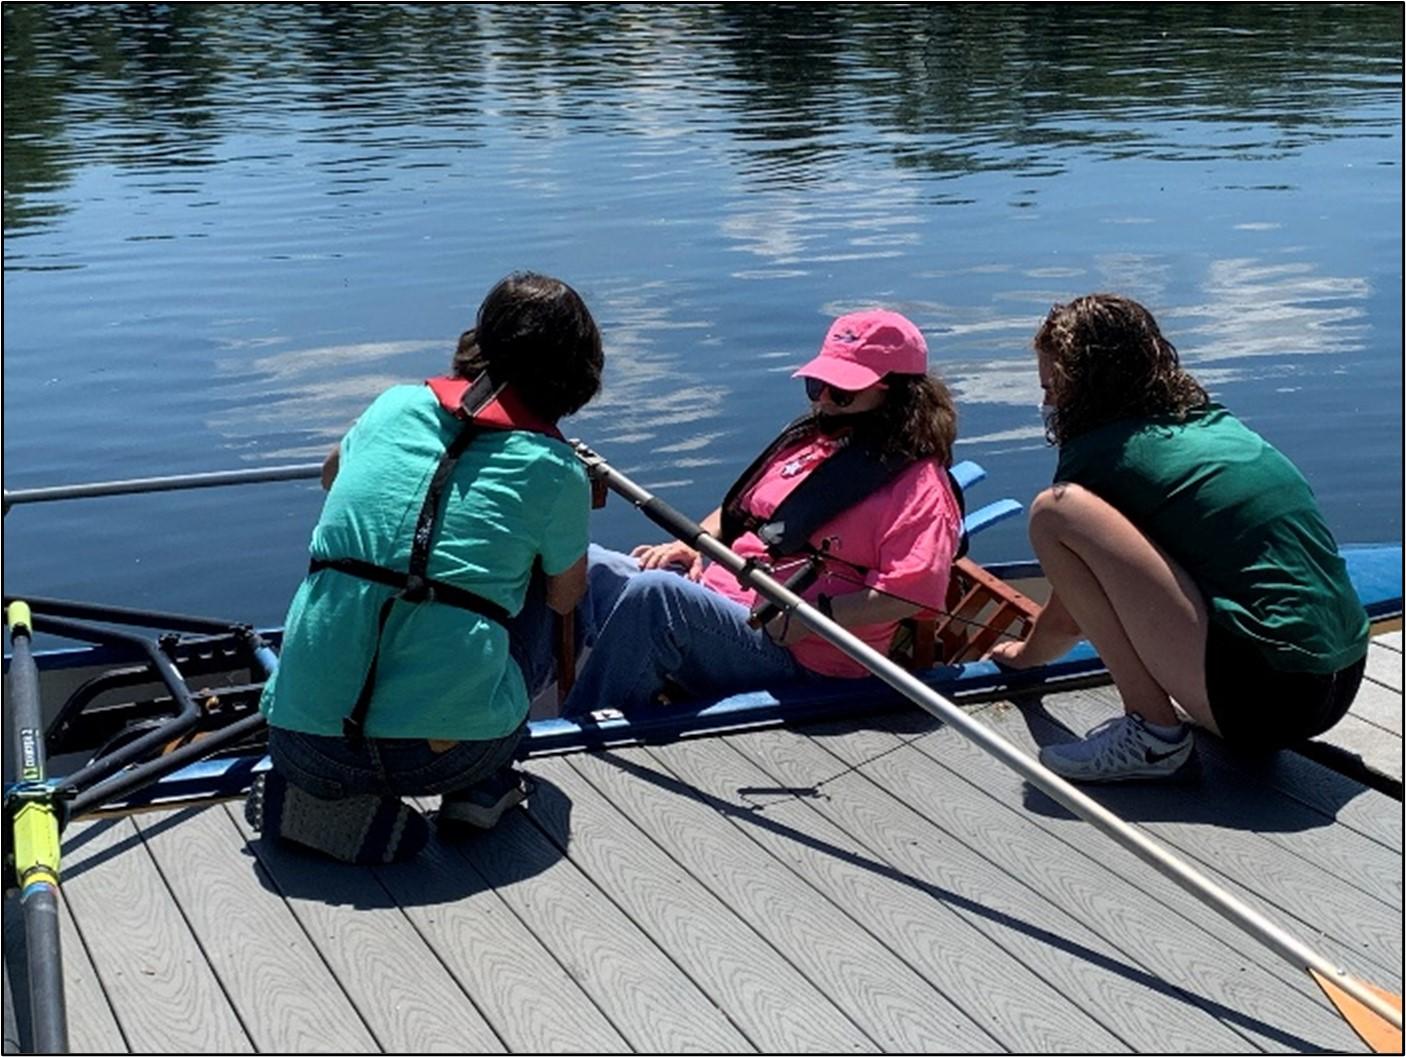 A rower at a dock is assisted by two people. It is a sunny day and the water is calm.